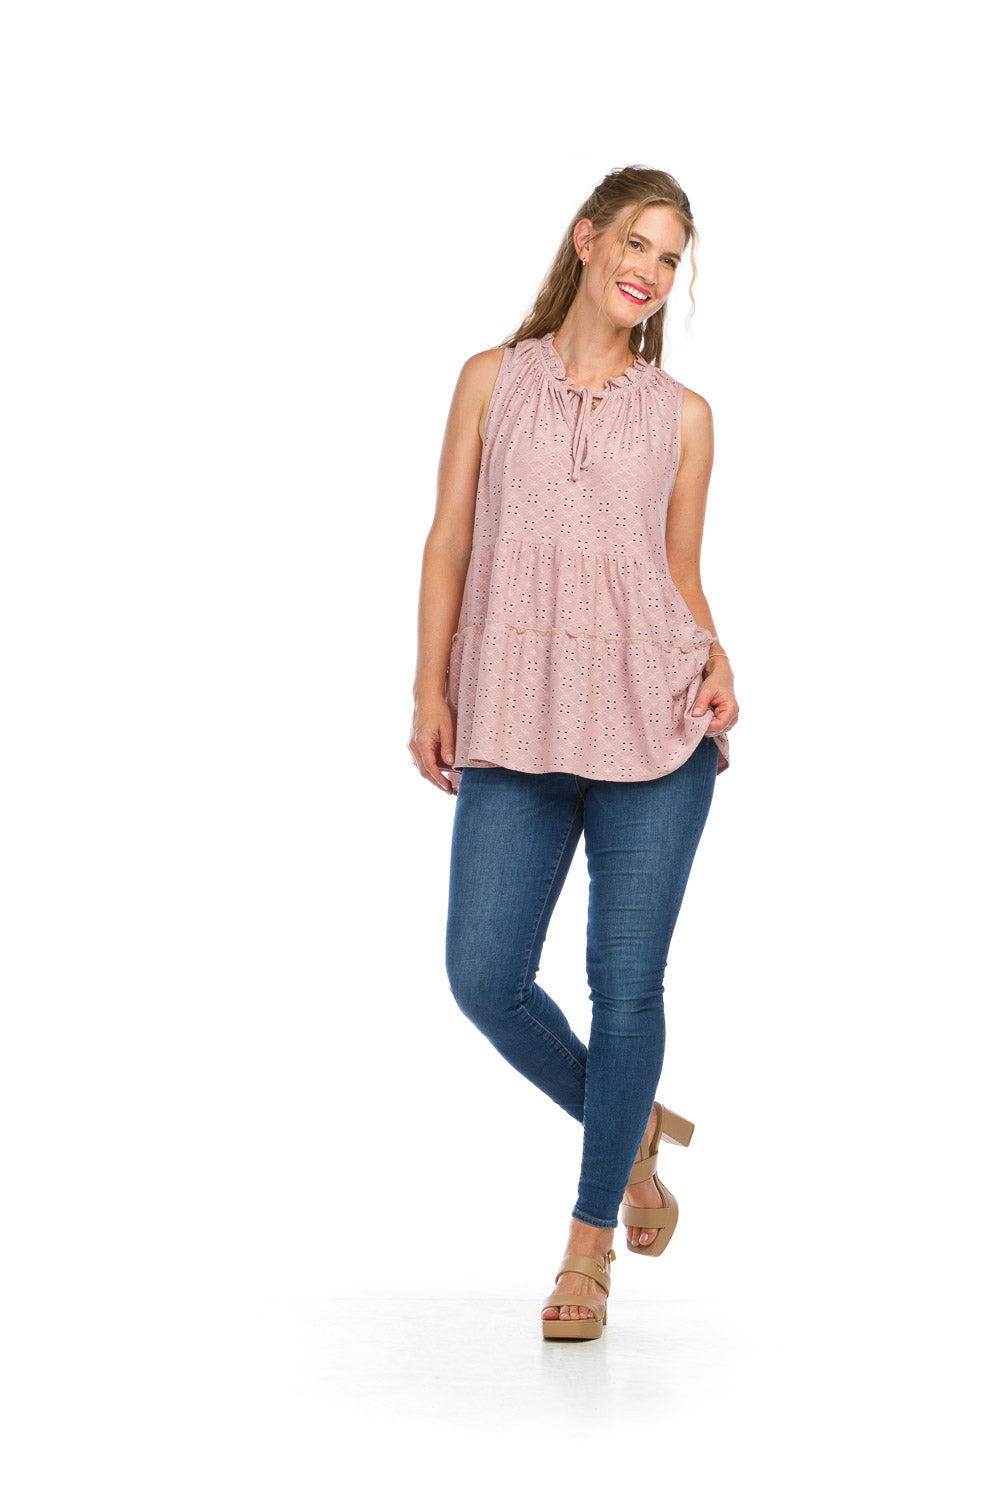 PT16039 ROSE Stretch Tiered Eyelet Sleeve less Top